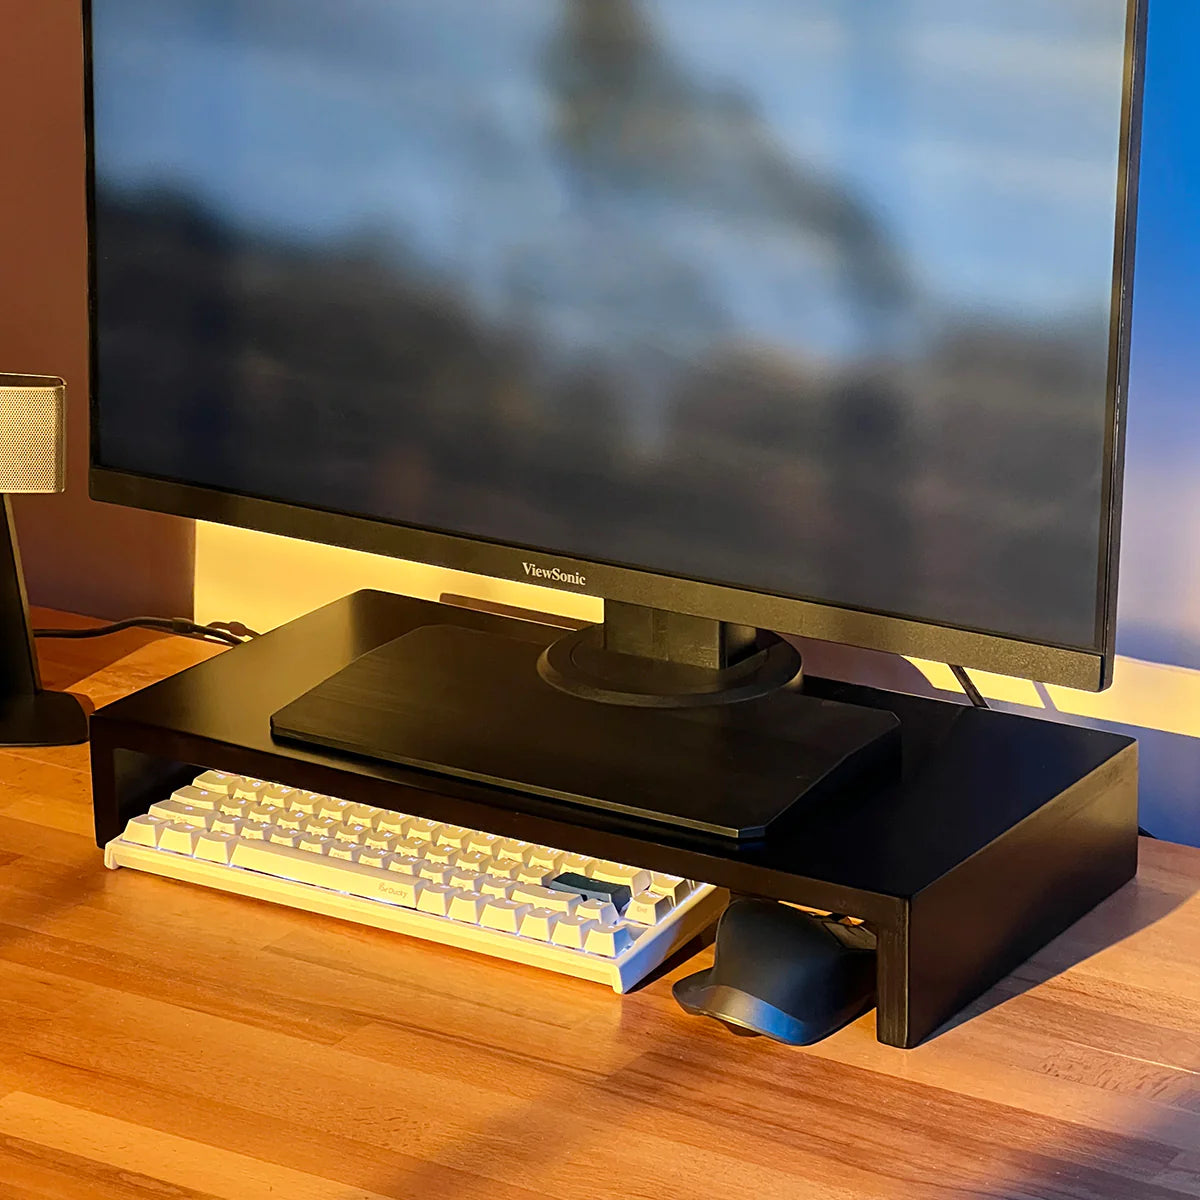 Modern stand riser by woodsy with monitor, mechanical keyboard and mouse on wooden desk.